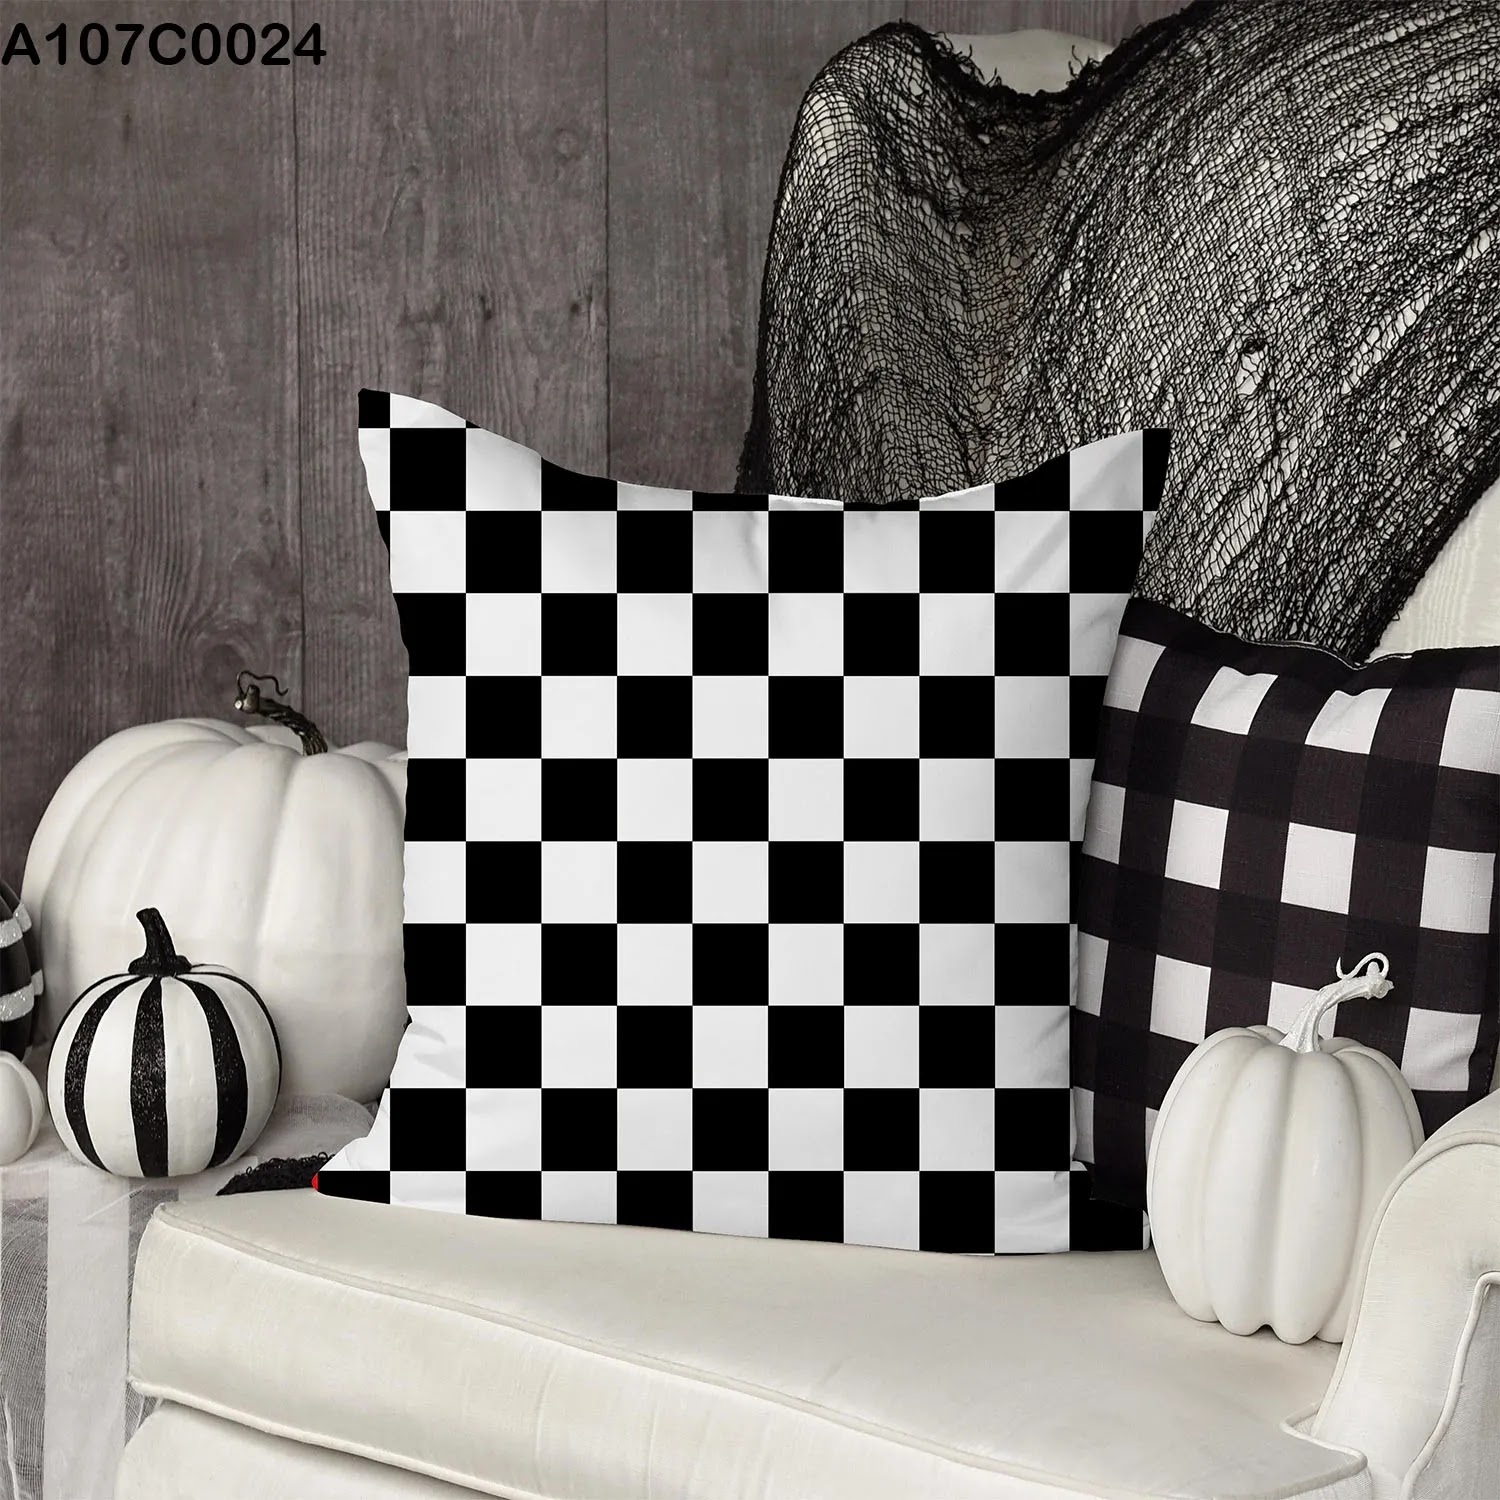 Pillow case with white and black squares